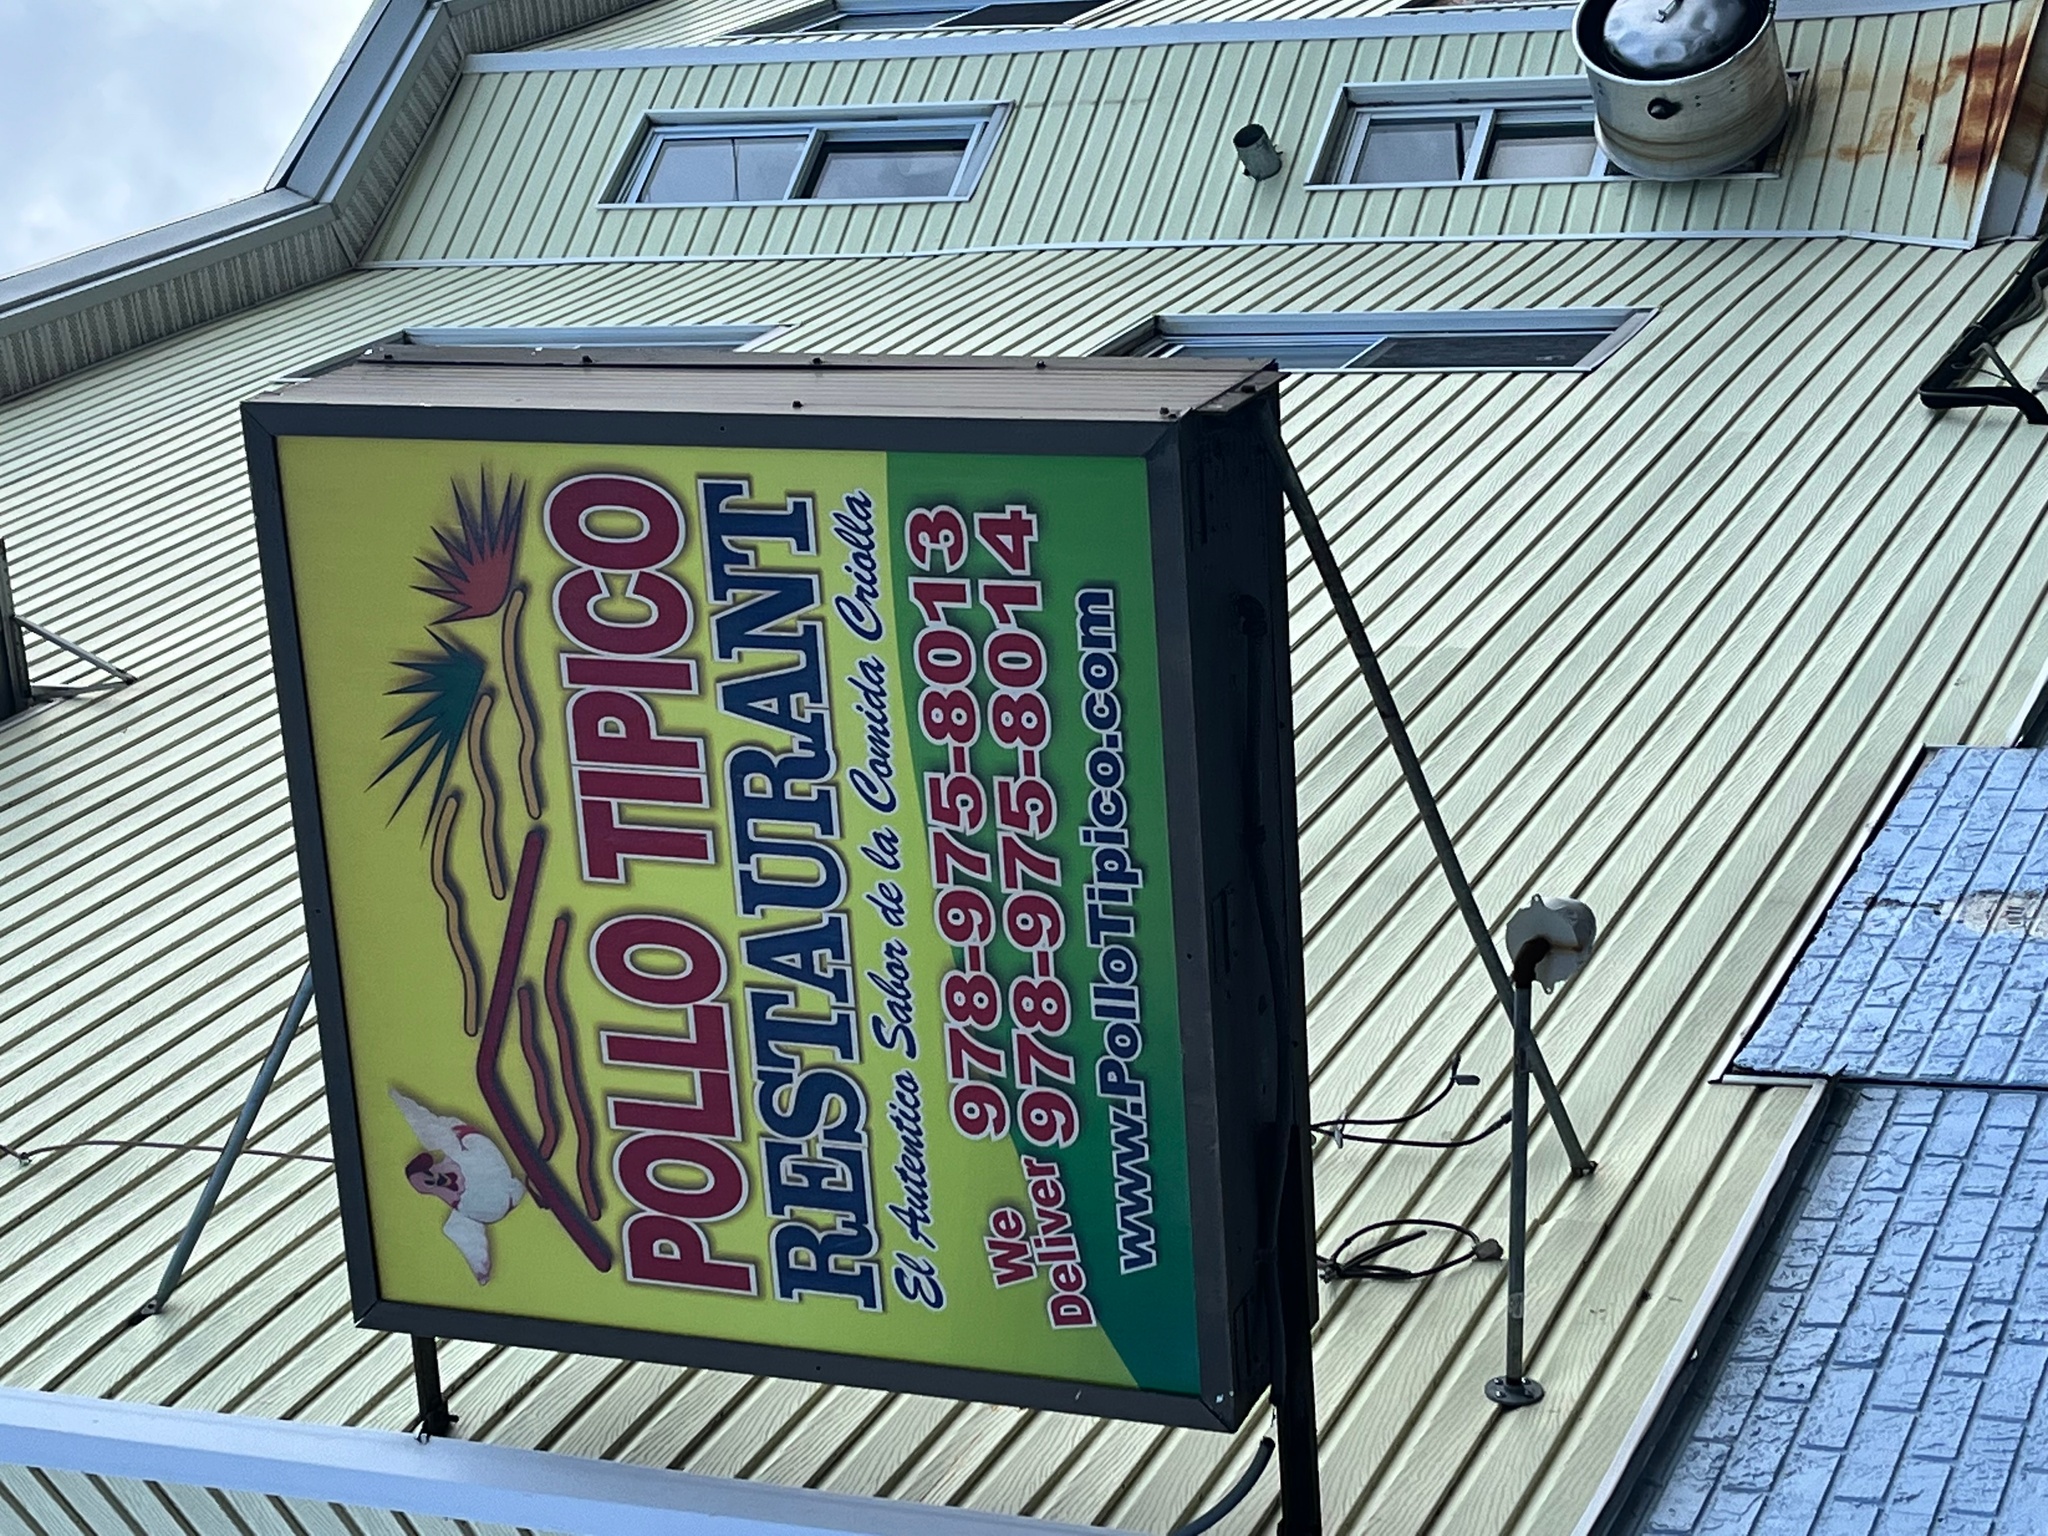 A sign for a Dominican restaurant hanging from the side of a building with yellow siding. The sign reads Pollo Tipico Restaurant.